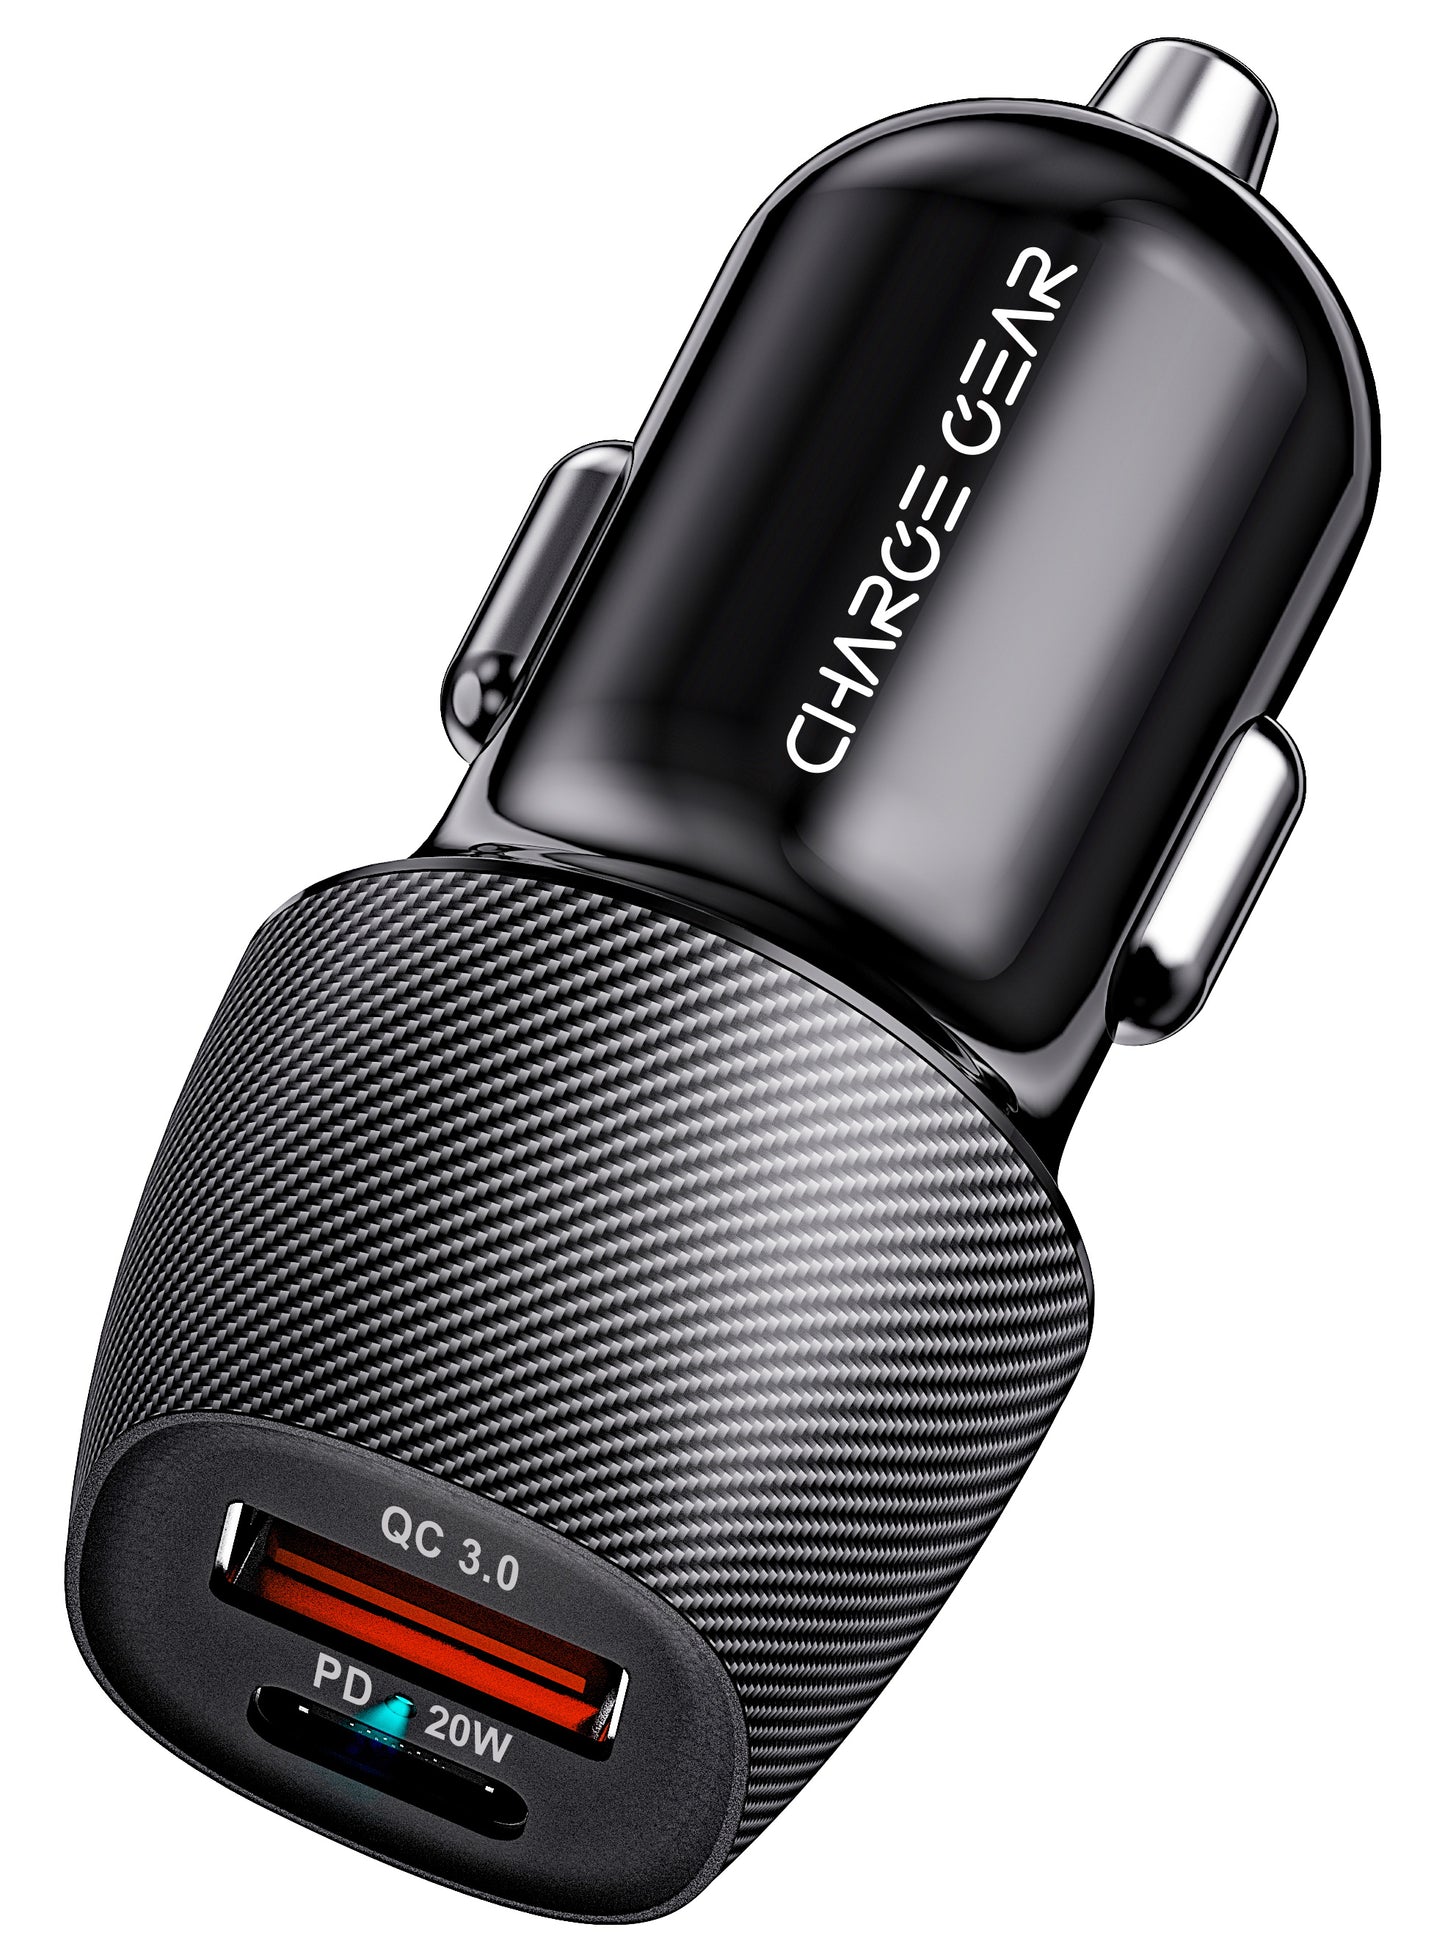 CHARGEGEAR 20W PD CAR CHARGER WITH 1X USB-A QC3.0 PORT & TYPE-C 20W PD PORT